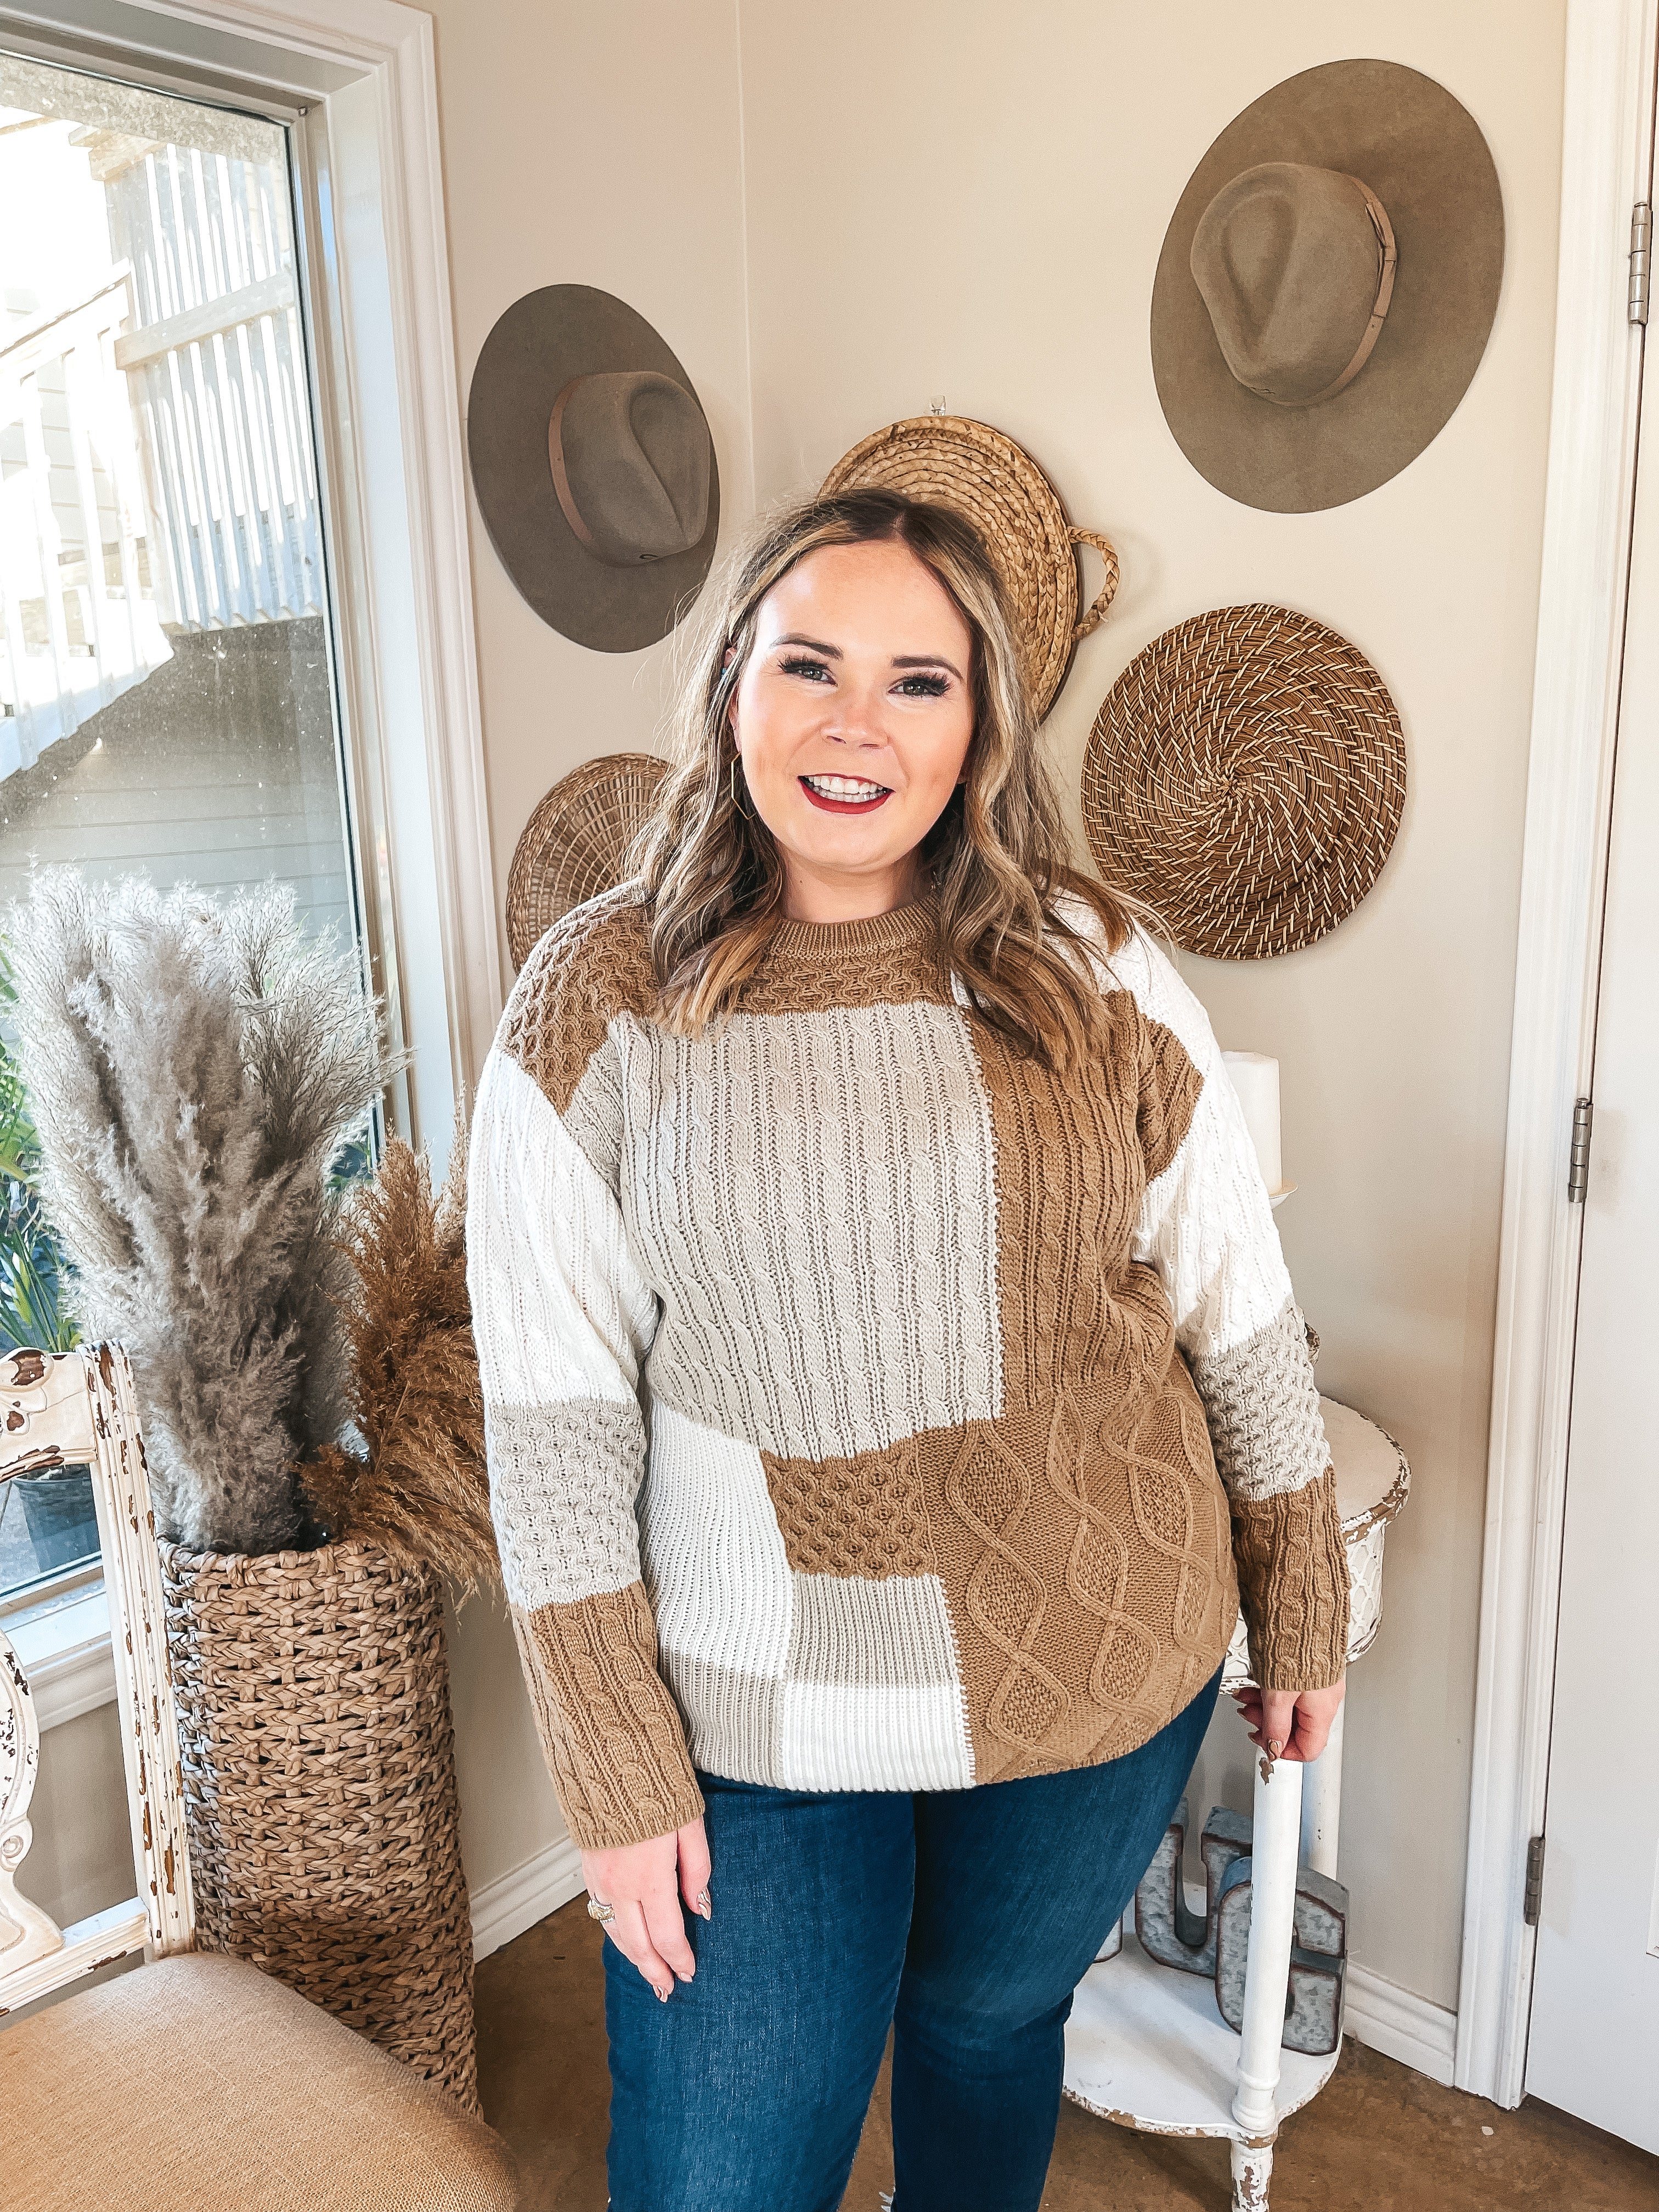 Frozen Lake Mix Knit Color Block Sweater in Ivory, Tan, and Grey - Giddy Up Glamour Boutique